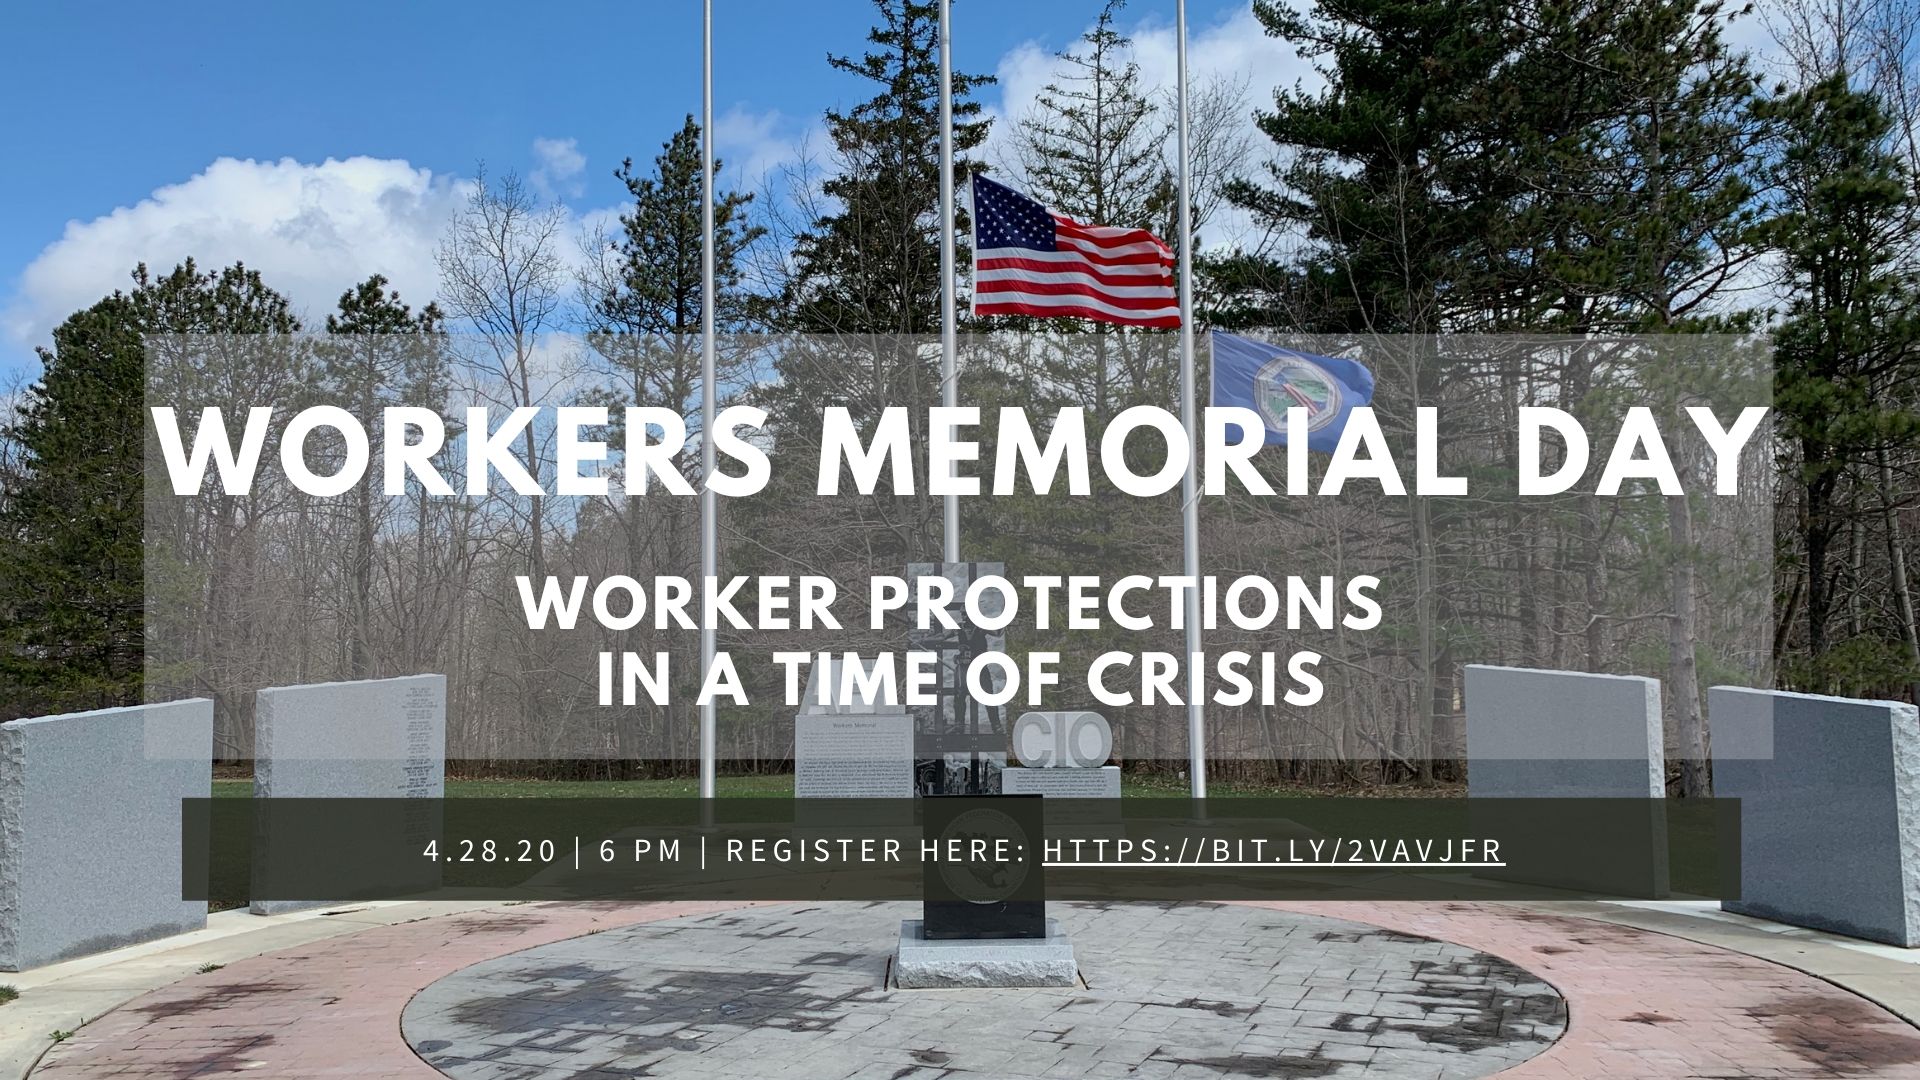 Banner for Workers Memorial Day with details of the event.